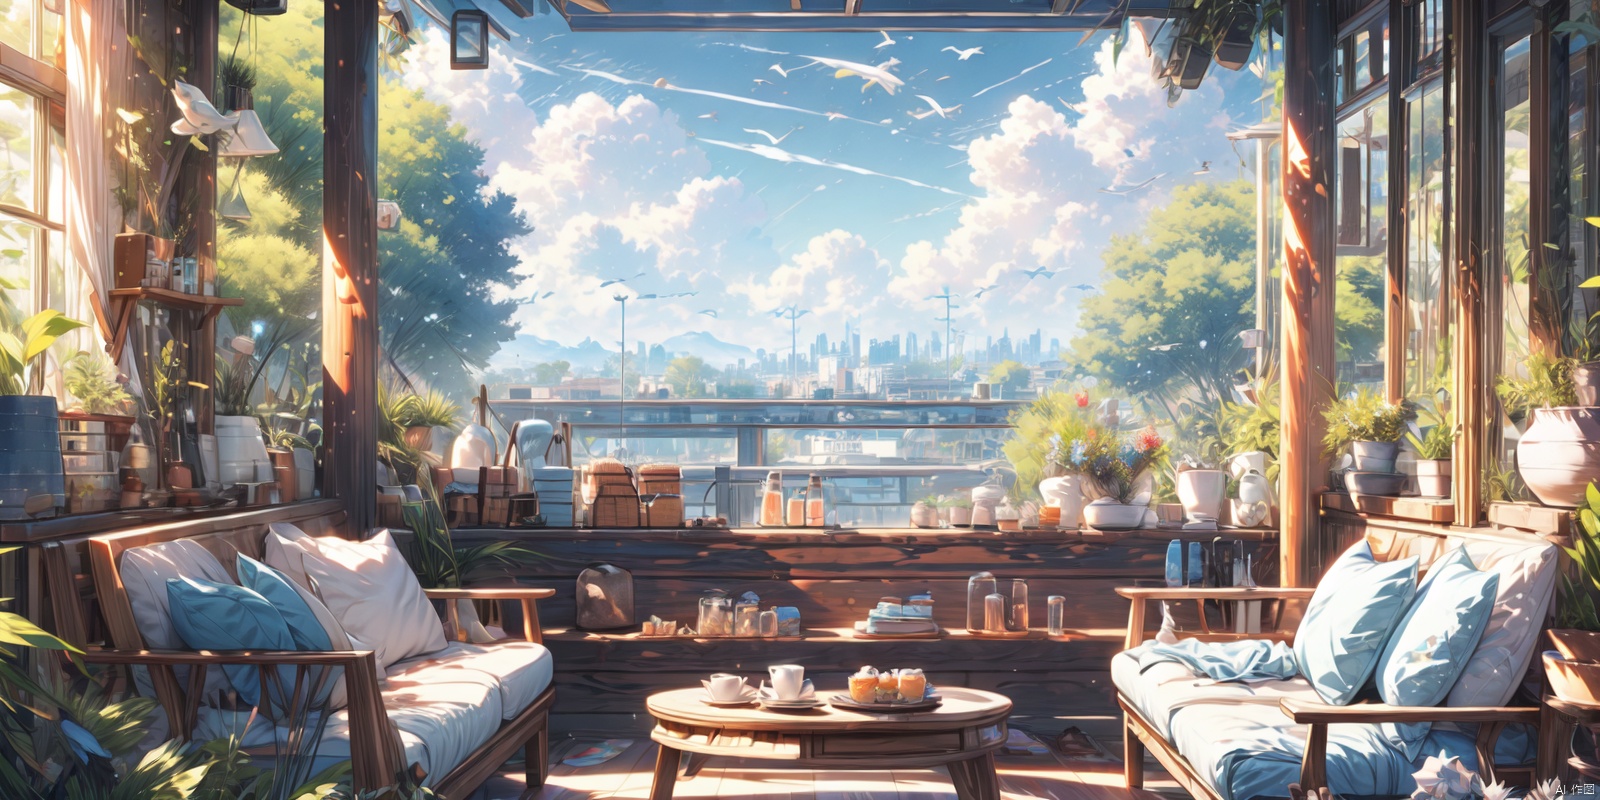 (masterpiece: 1.2) , best quality, Pixiv, comfortable animated scenes, city in the sky, WLOP wallpaper, set, Chinese architecture, Chinese style, interior, fairy tale, fantasy color, sofa, pillow, plush doll, lace, Tulle, feathers, candy, foam, no people, trees, flowers, floor-to-ceiling windows, colorful clouds, blue skies, birds, warm rooms, cats, wide-angle, depth of field, mid-shot, healing, ultra-detail